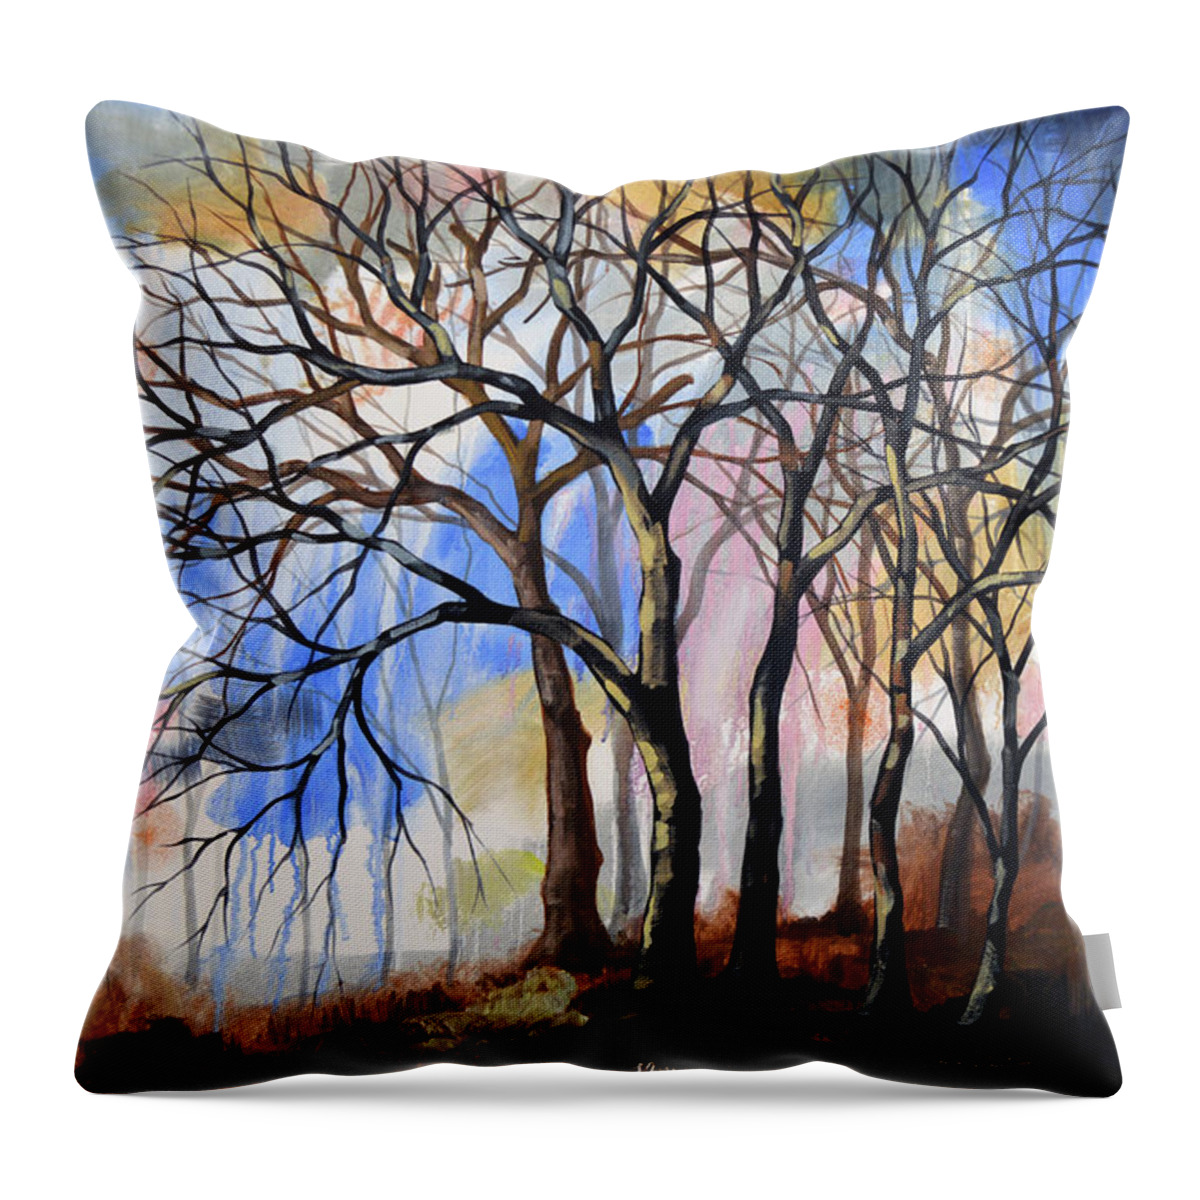 Tree Art Throw Pillow featuring the painting Surrounded by Friends by Amy Giacomelli